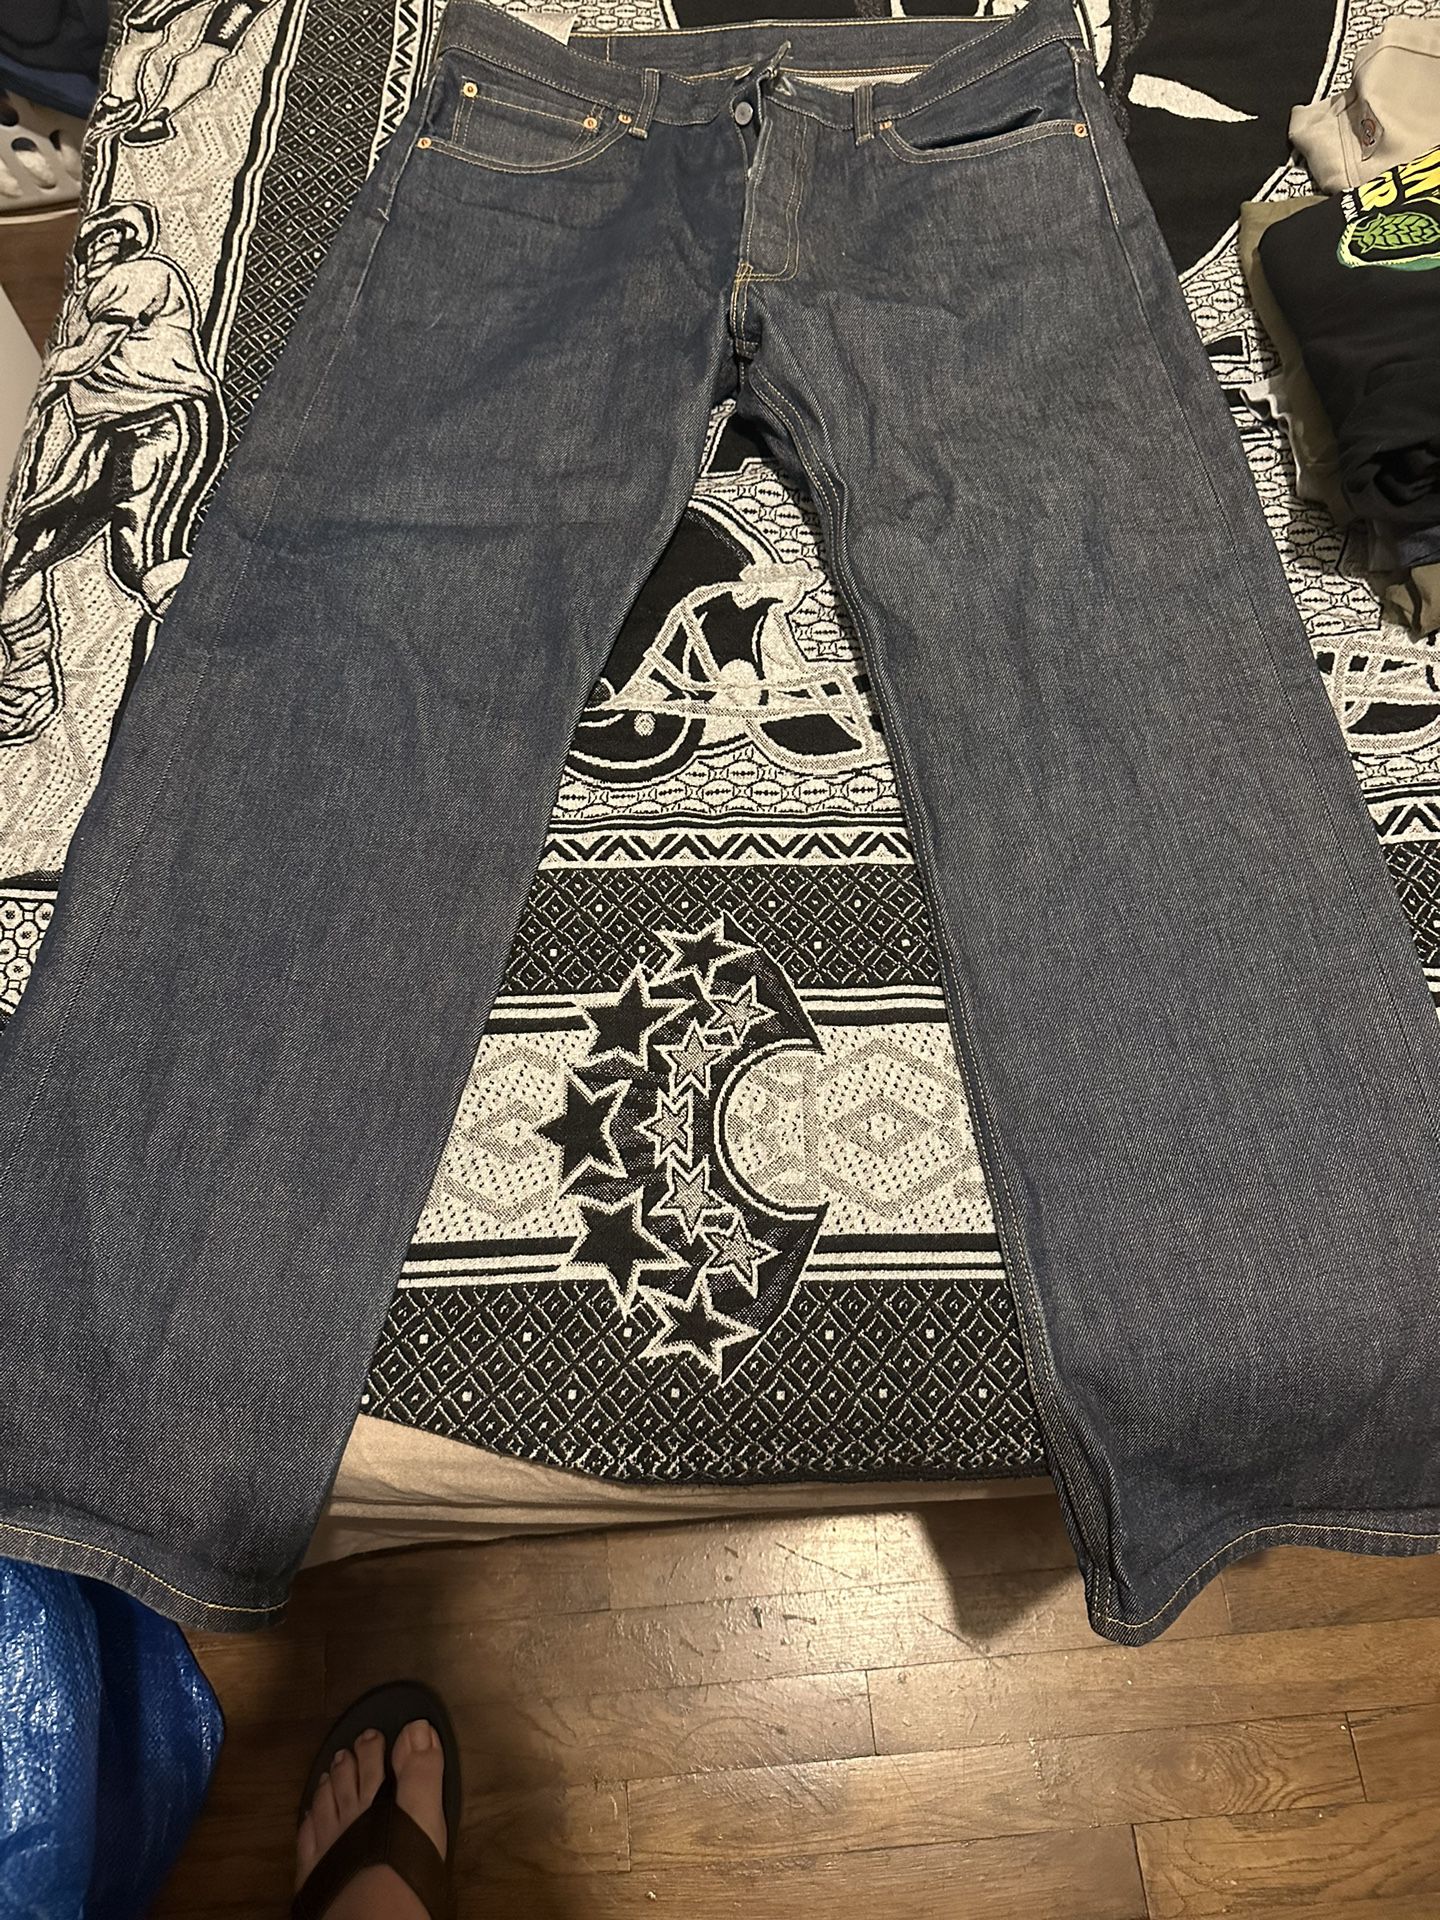 Levi’s 501 Jeans 36X32 Make Me An Offer!